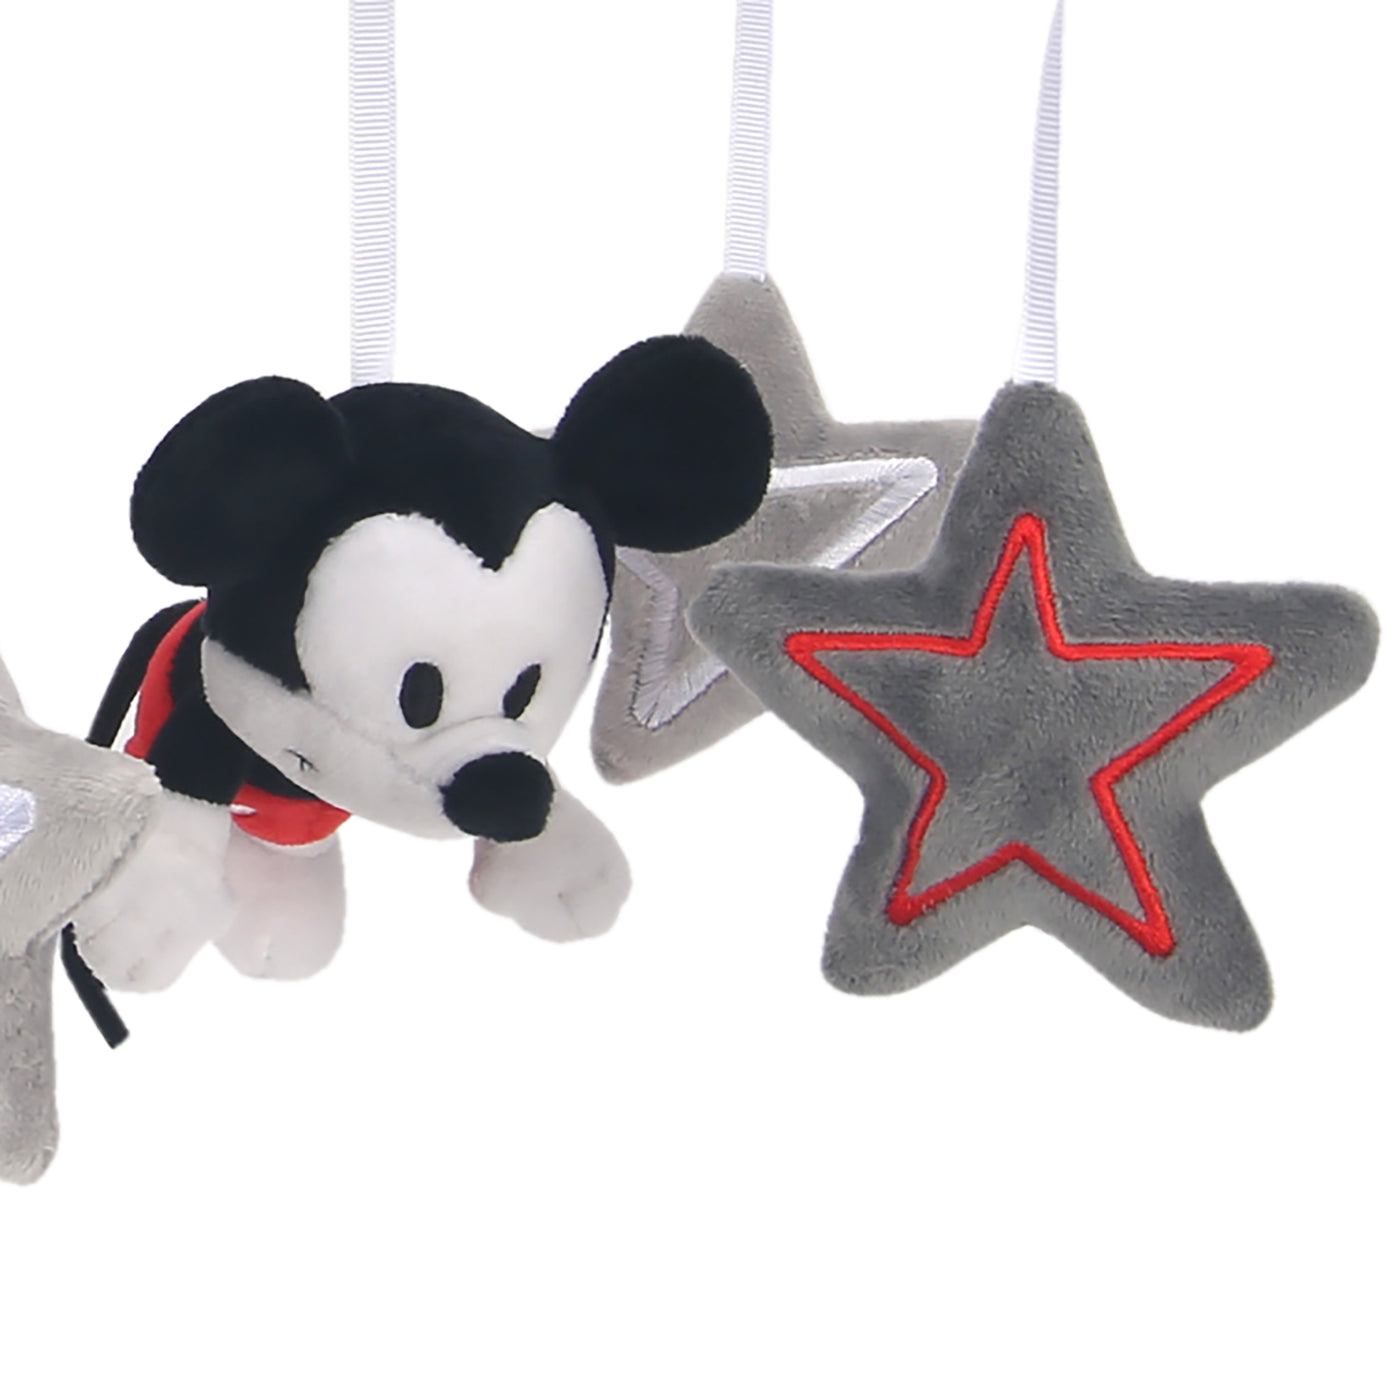 Magical Mickey Musical Mobile